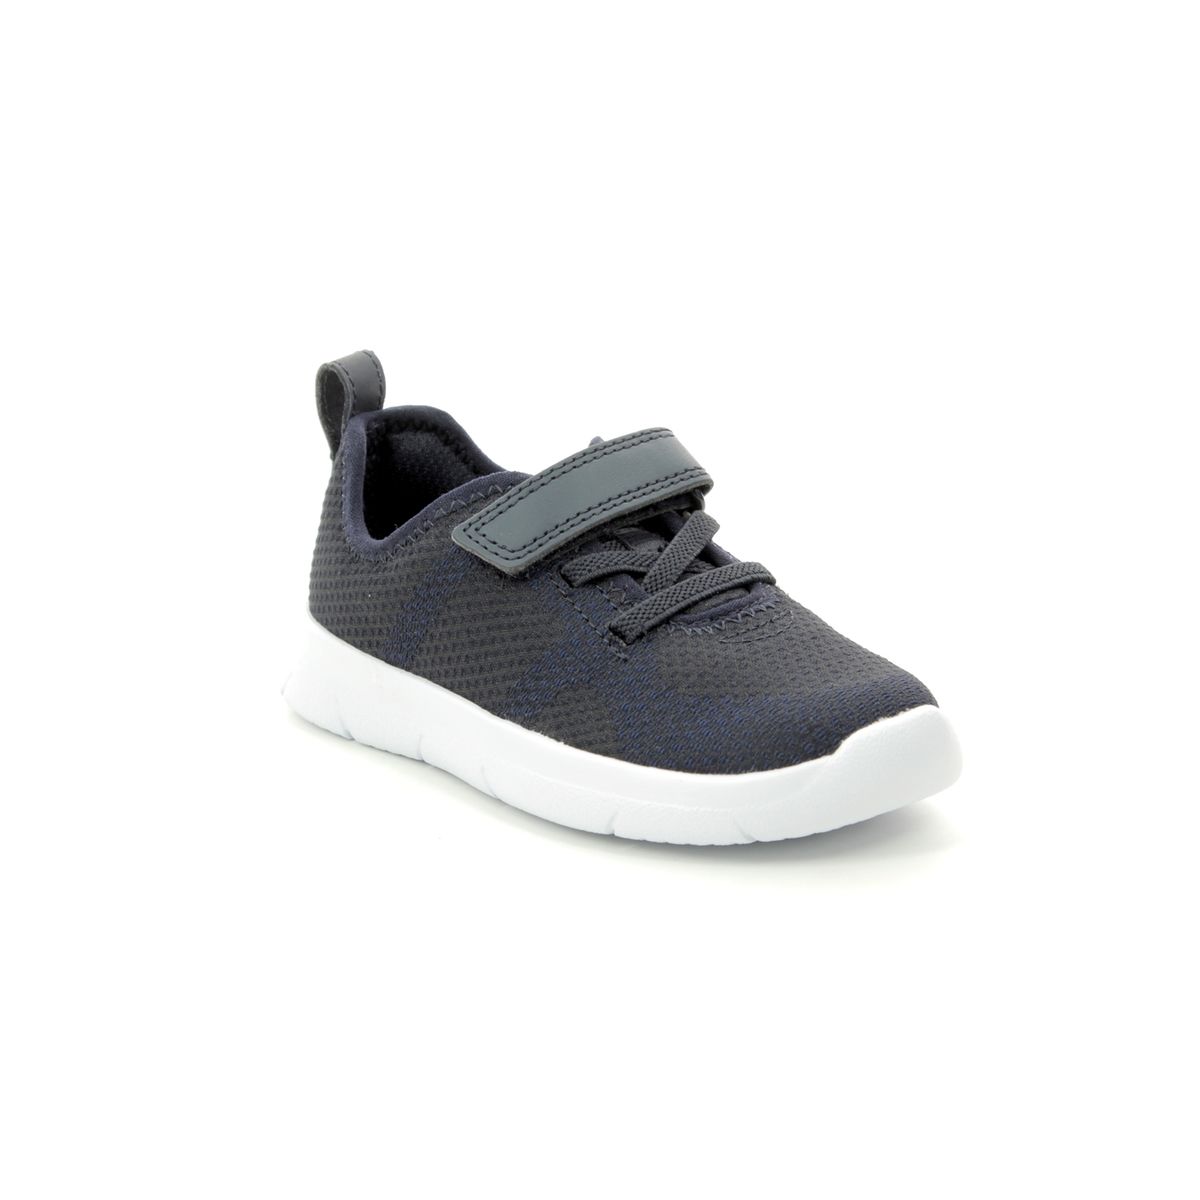 Clarks Ath Flux T Navy Kids Toddler Boys Trainers 412697G In Size 4 In Plain Navy G Width Fitting For kids